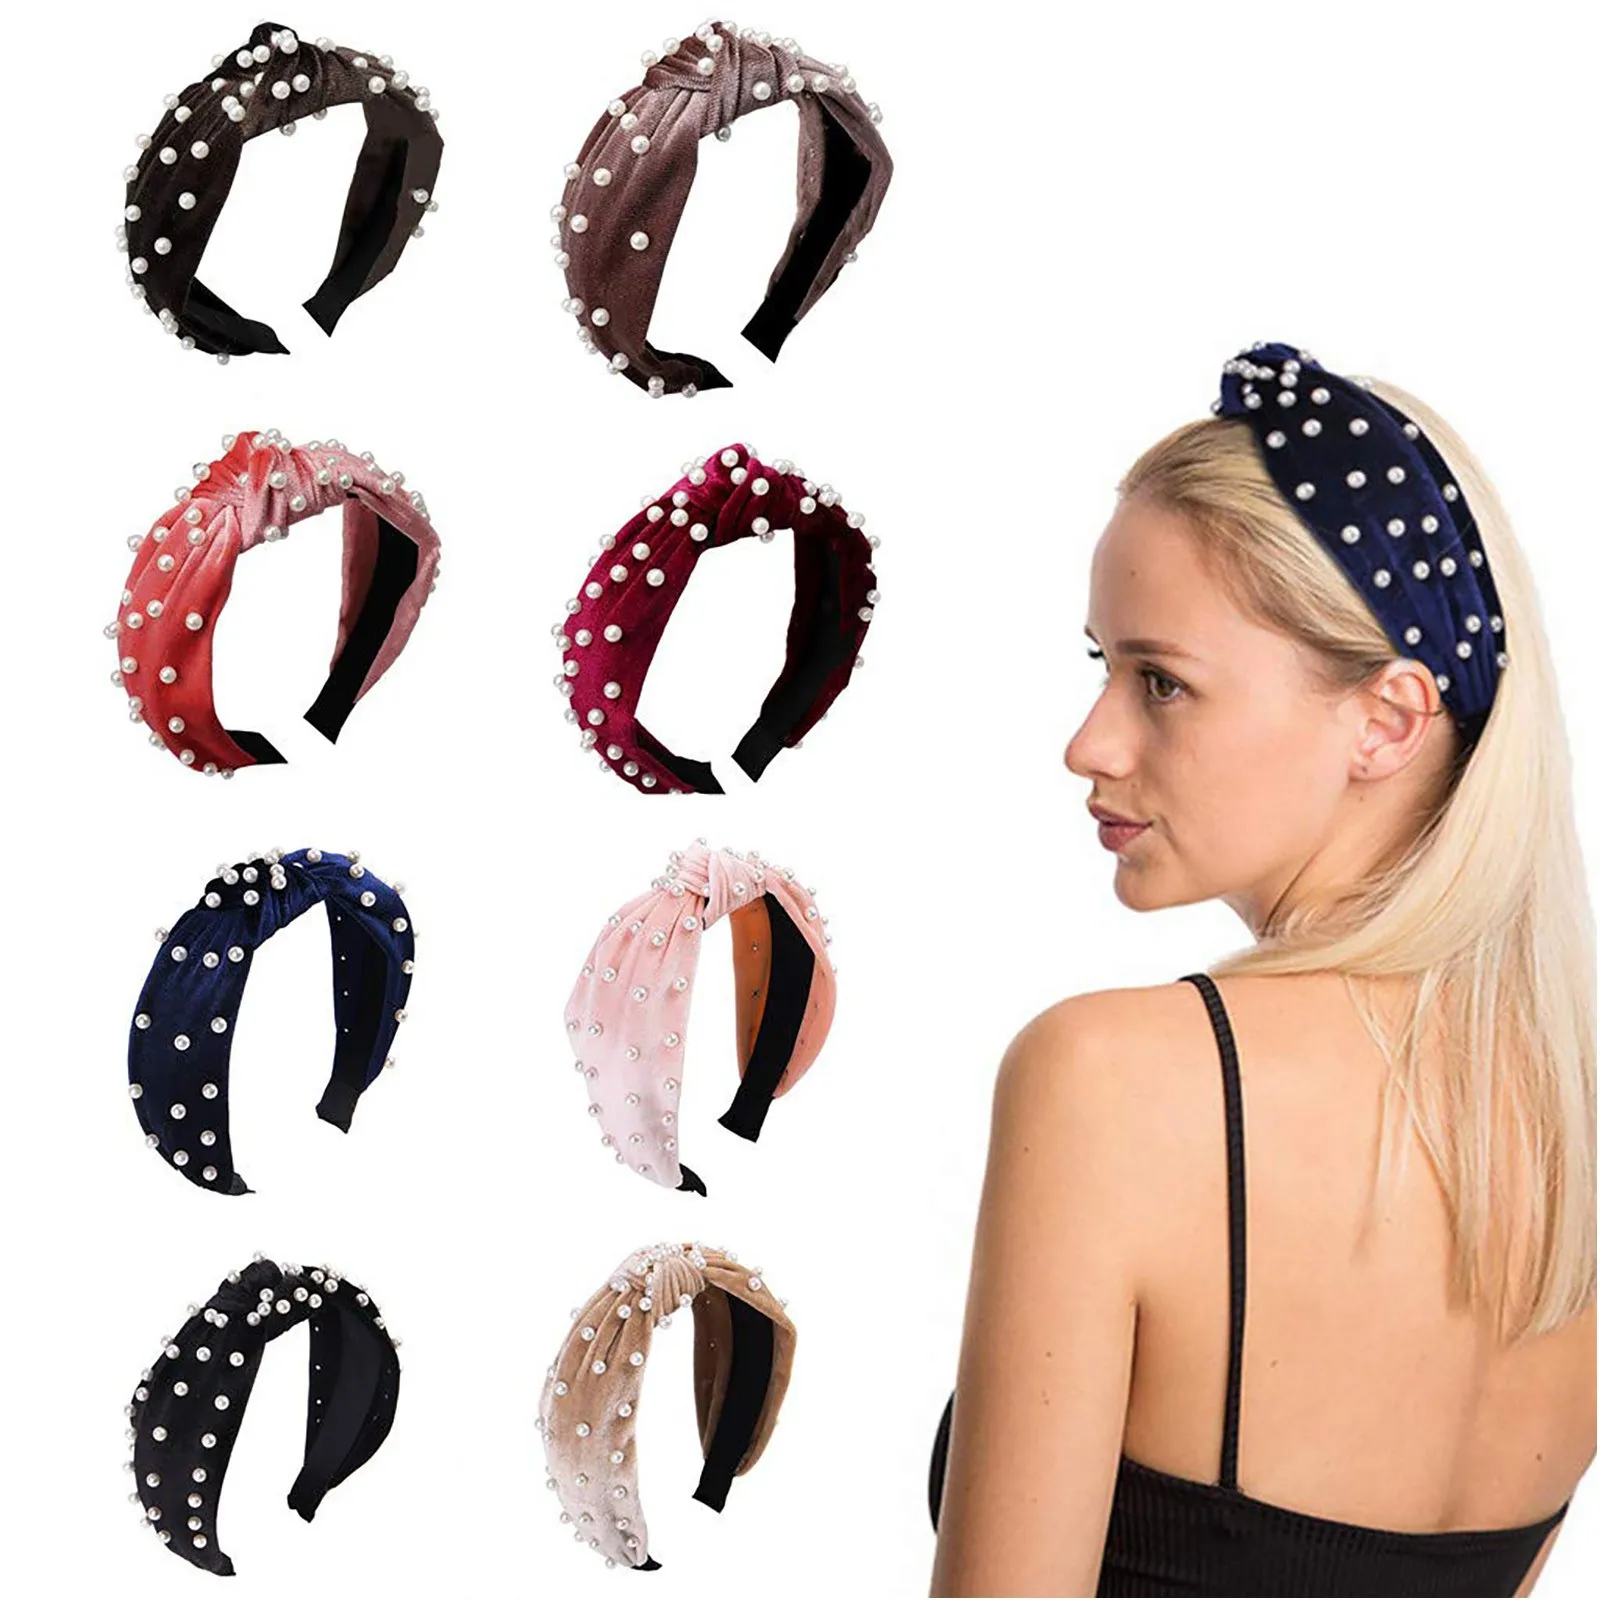 

New Bohemian Velvet Knot Faux Pearl Headband Cross Knot Beading Hair Band Twisted Knotted Wide Hair Hoops Girls Hair Accessories